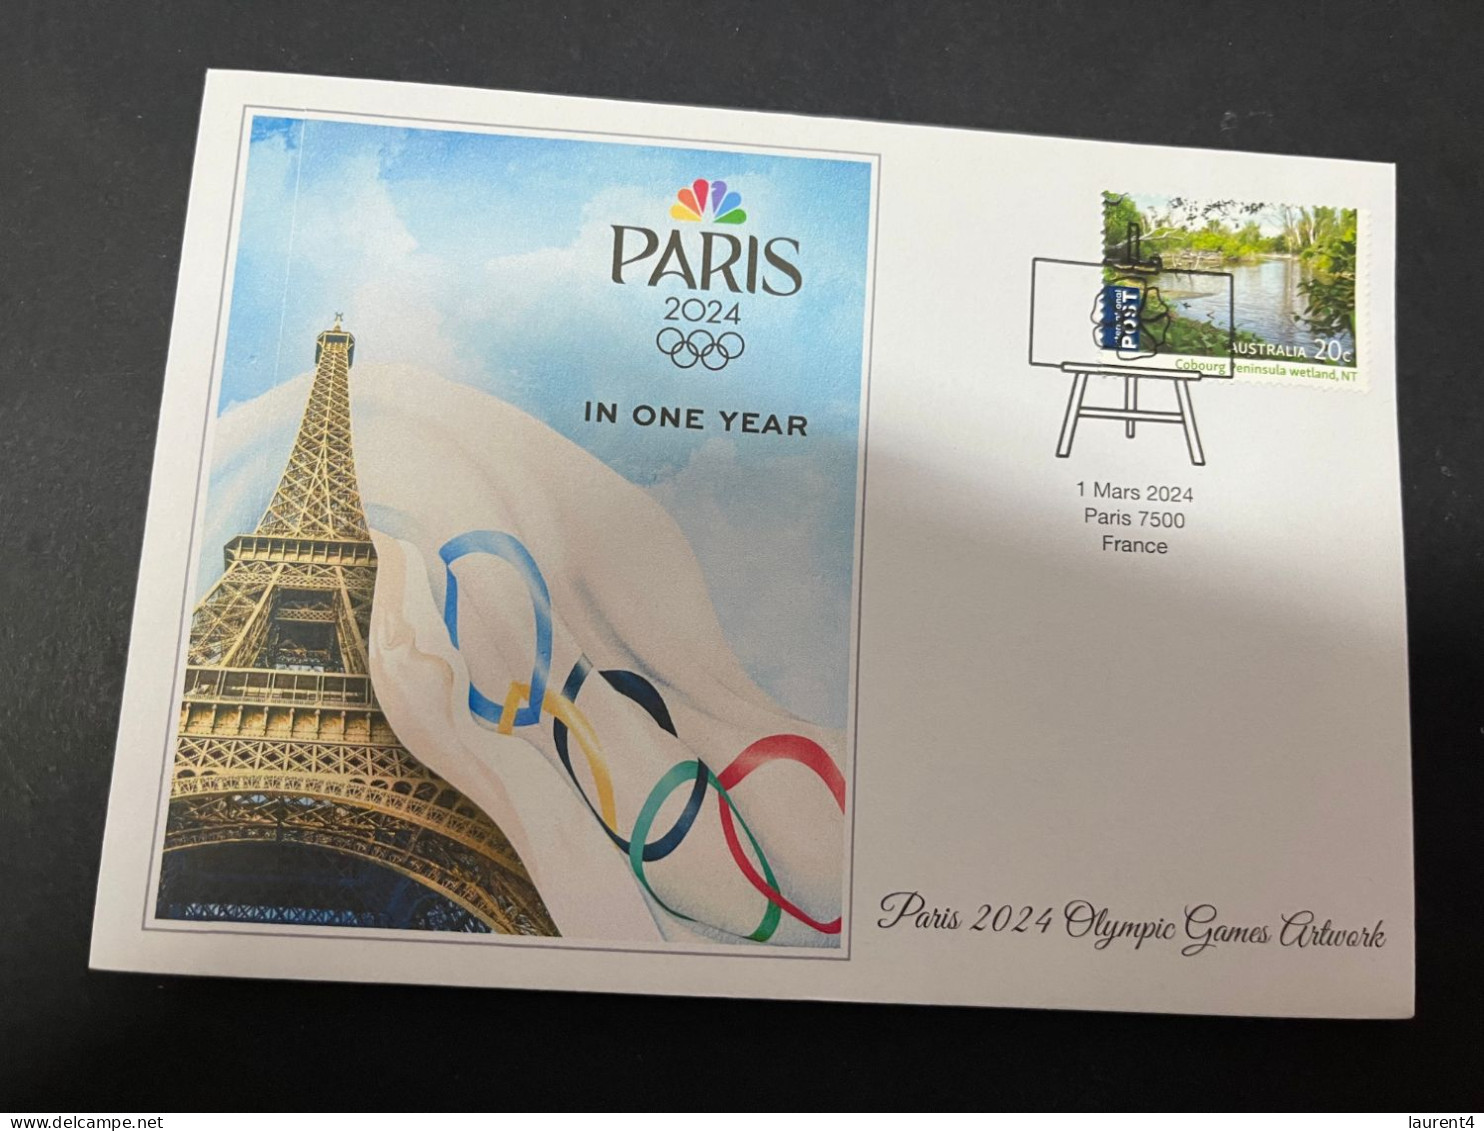 10-3-2024 (2 Y 37) Paris Olympic Games 2024 - 6 (of 12 Covers Series) For The Paris 2024 Olympic Games Artwork - Sommer 2024: Paris